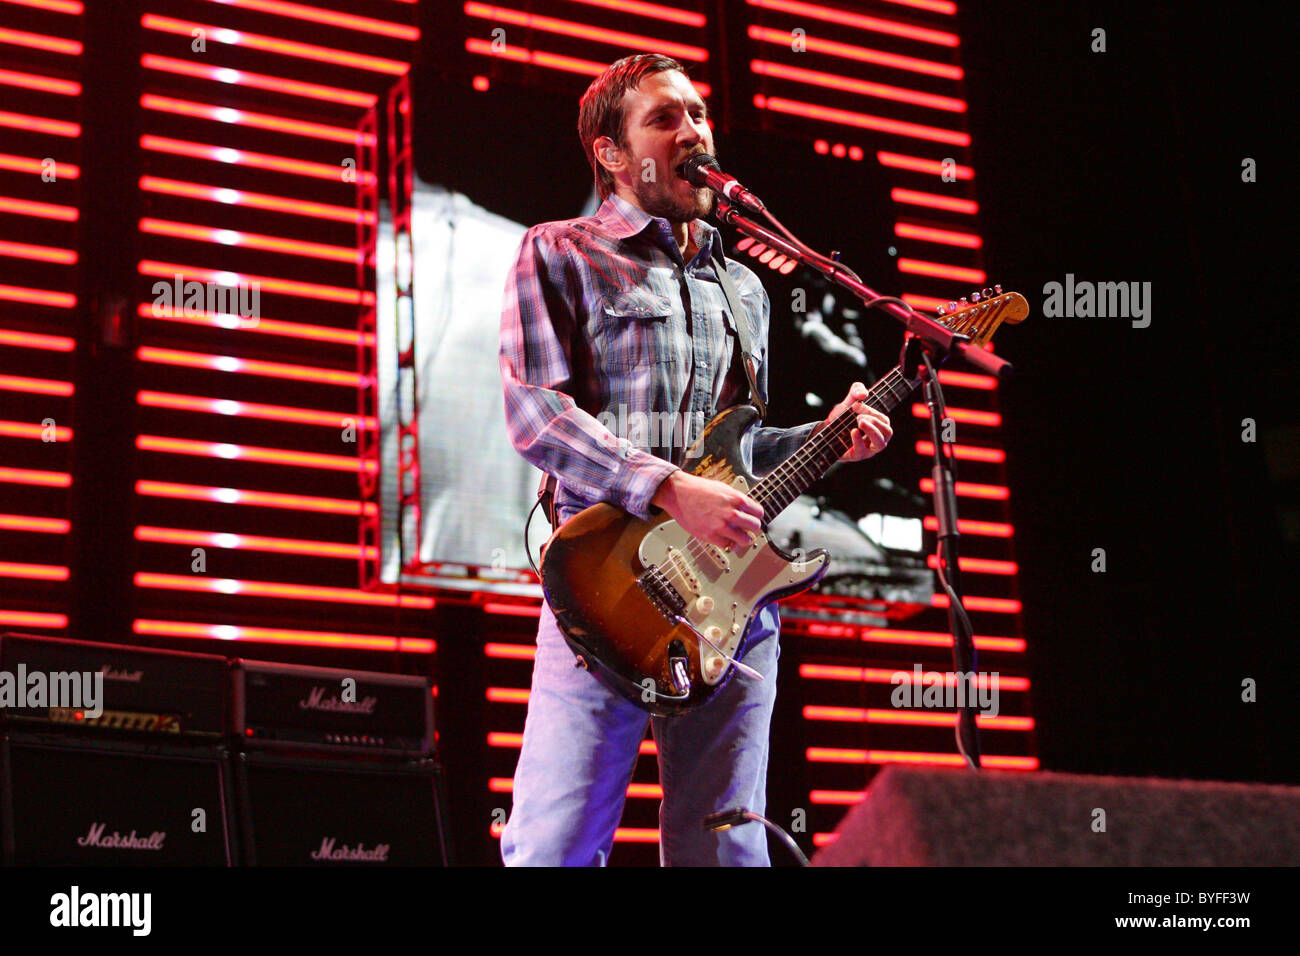 John Frusciante Red Hot Chili Peppers performing live in a sold out show at the AT&T Center San Antonio, Texas - 06.03.07 Stock Photo